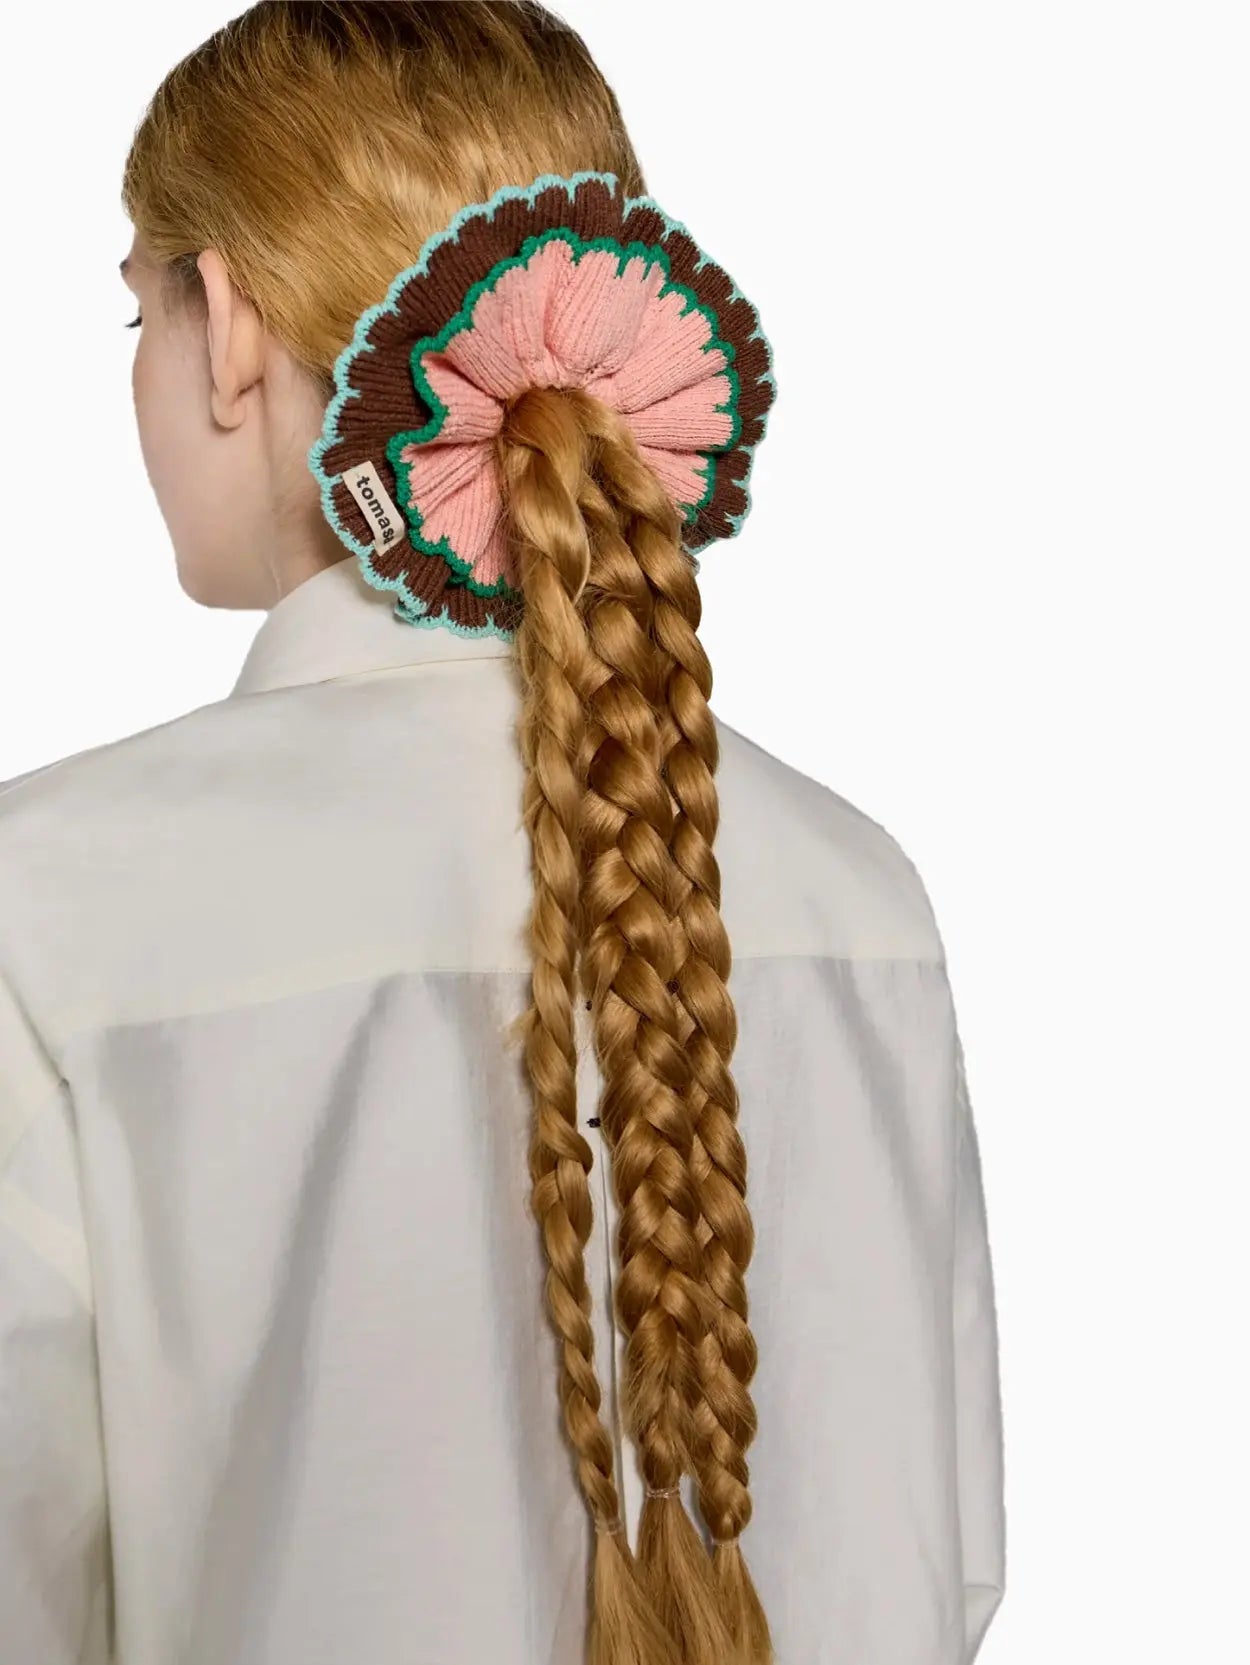 A Ruffle Scrunchie Tierra with a soft pink center, edged with dark brown and a thin green trim. A small white tag labeled "Tomasa" is attached to the scrunchie, available at Bassalstore in Barcelona. The background is plain white.